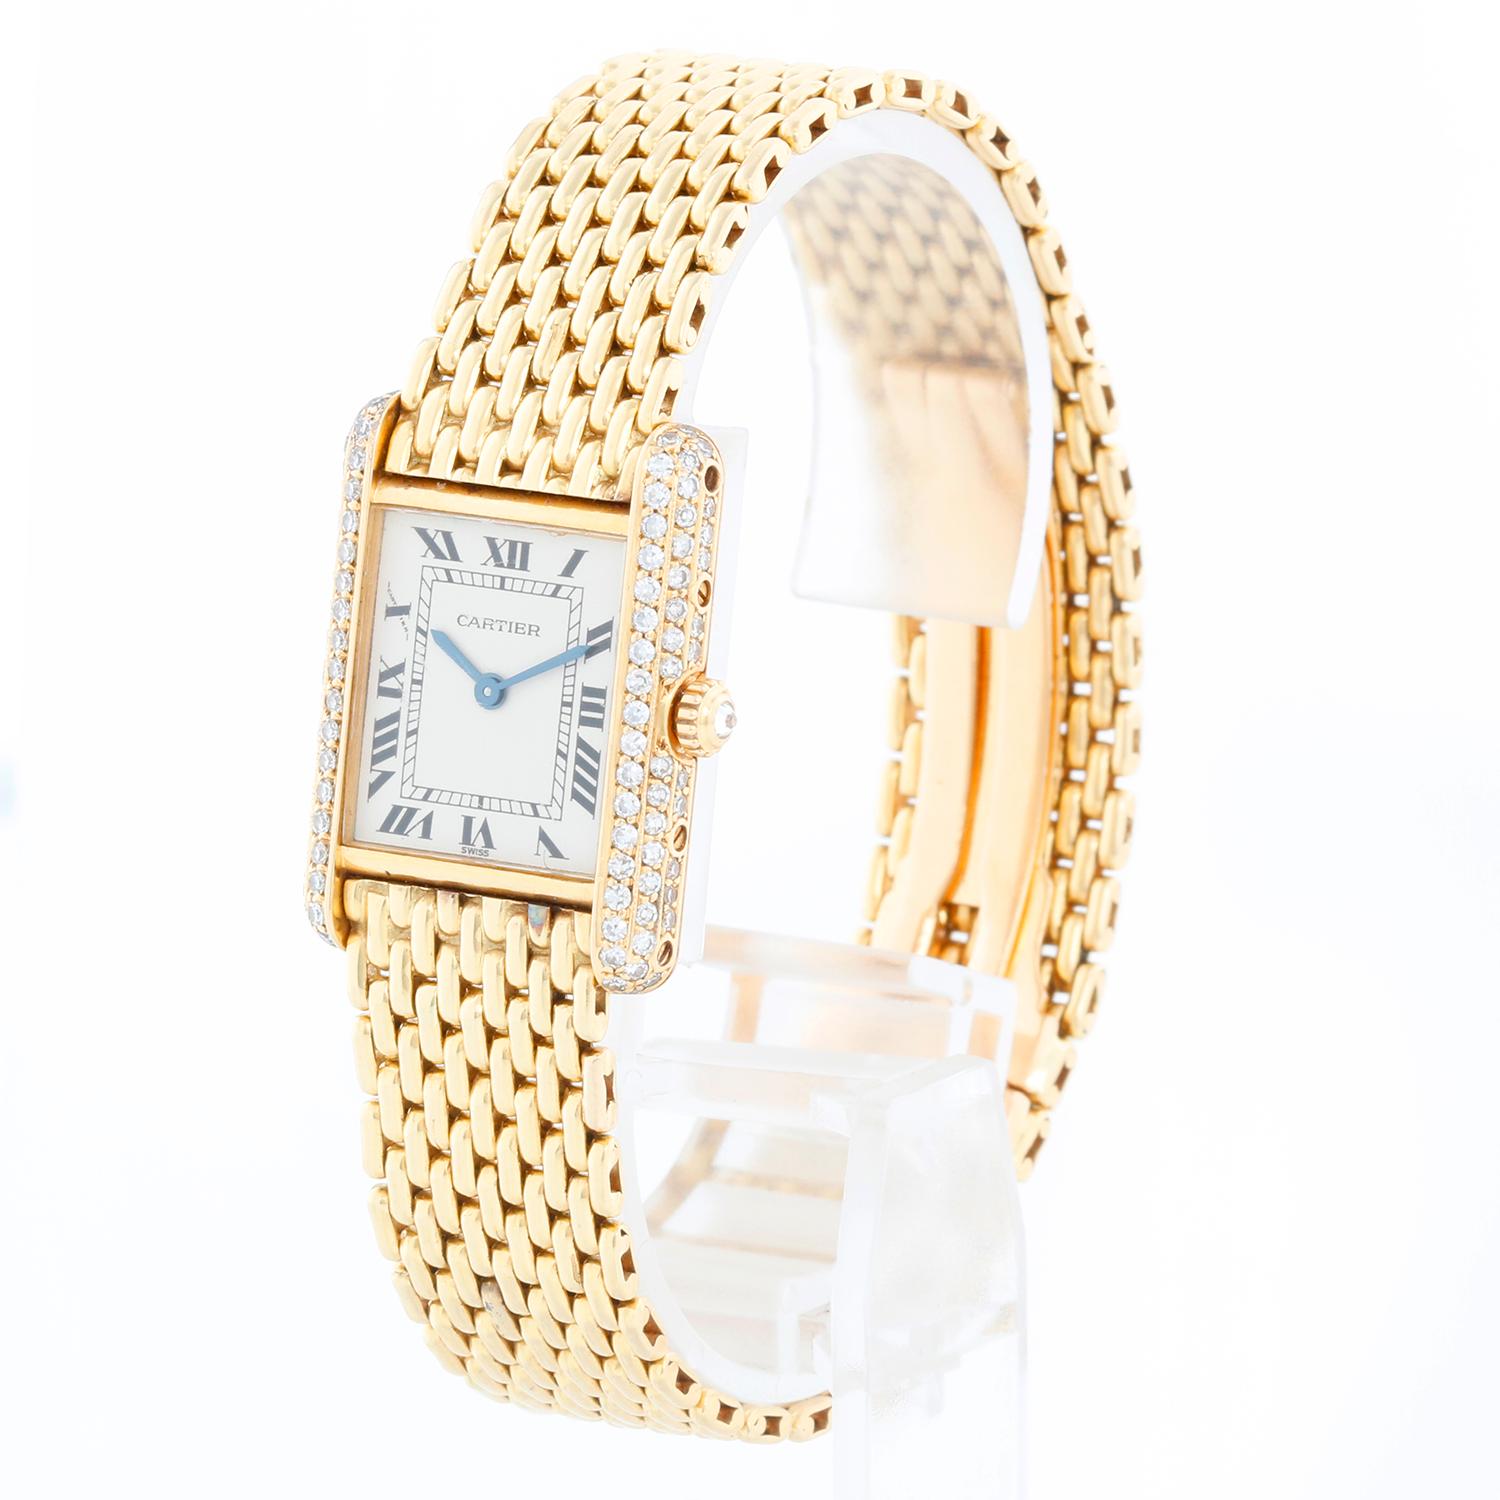 Cartier 18K Yellow Gold Tank Ladies Watch - Quartz. 18K yellow gold with diamond case ( 21 x 28 mm ). Silver tone dial with black roman numerals. Rice link bracelet with deployant clasp; will fit a 7 inch wrist. Pre-owned with Cartier box.